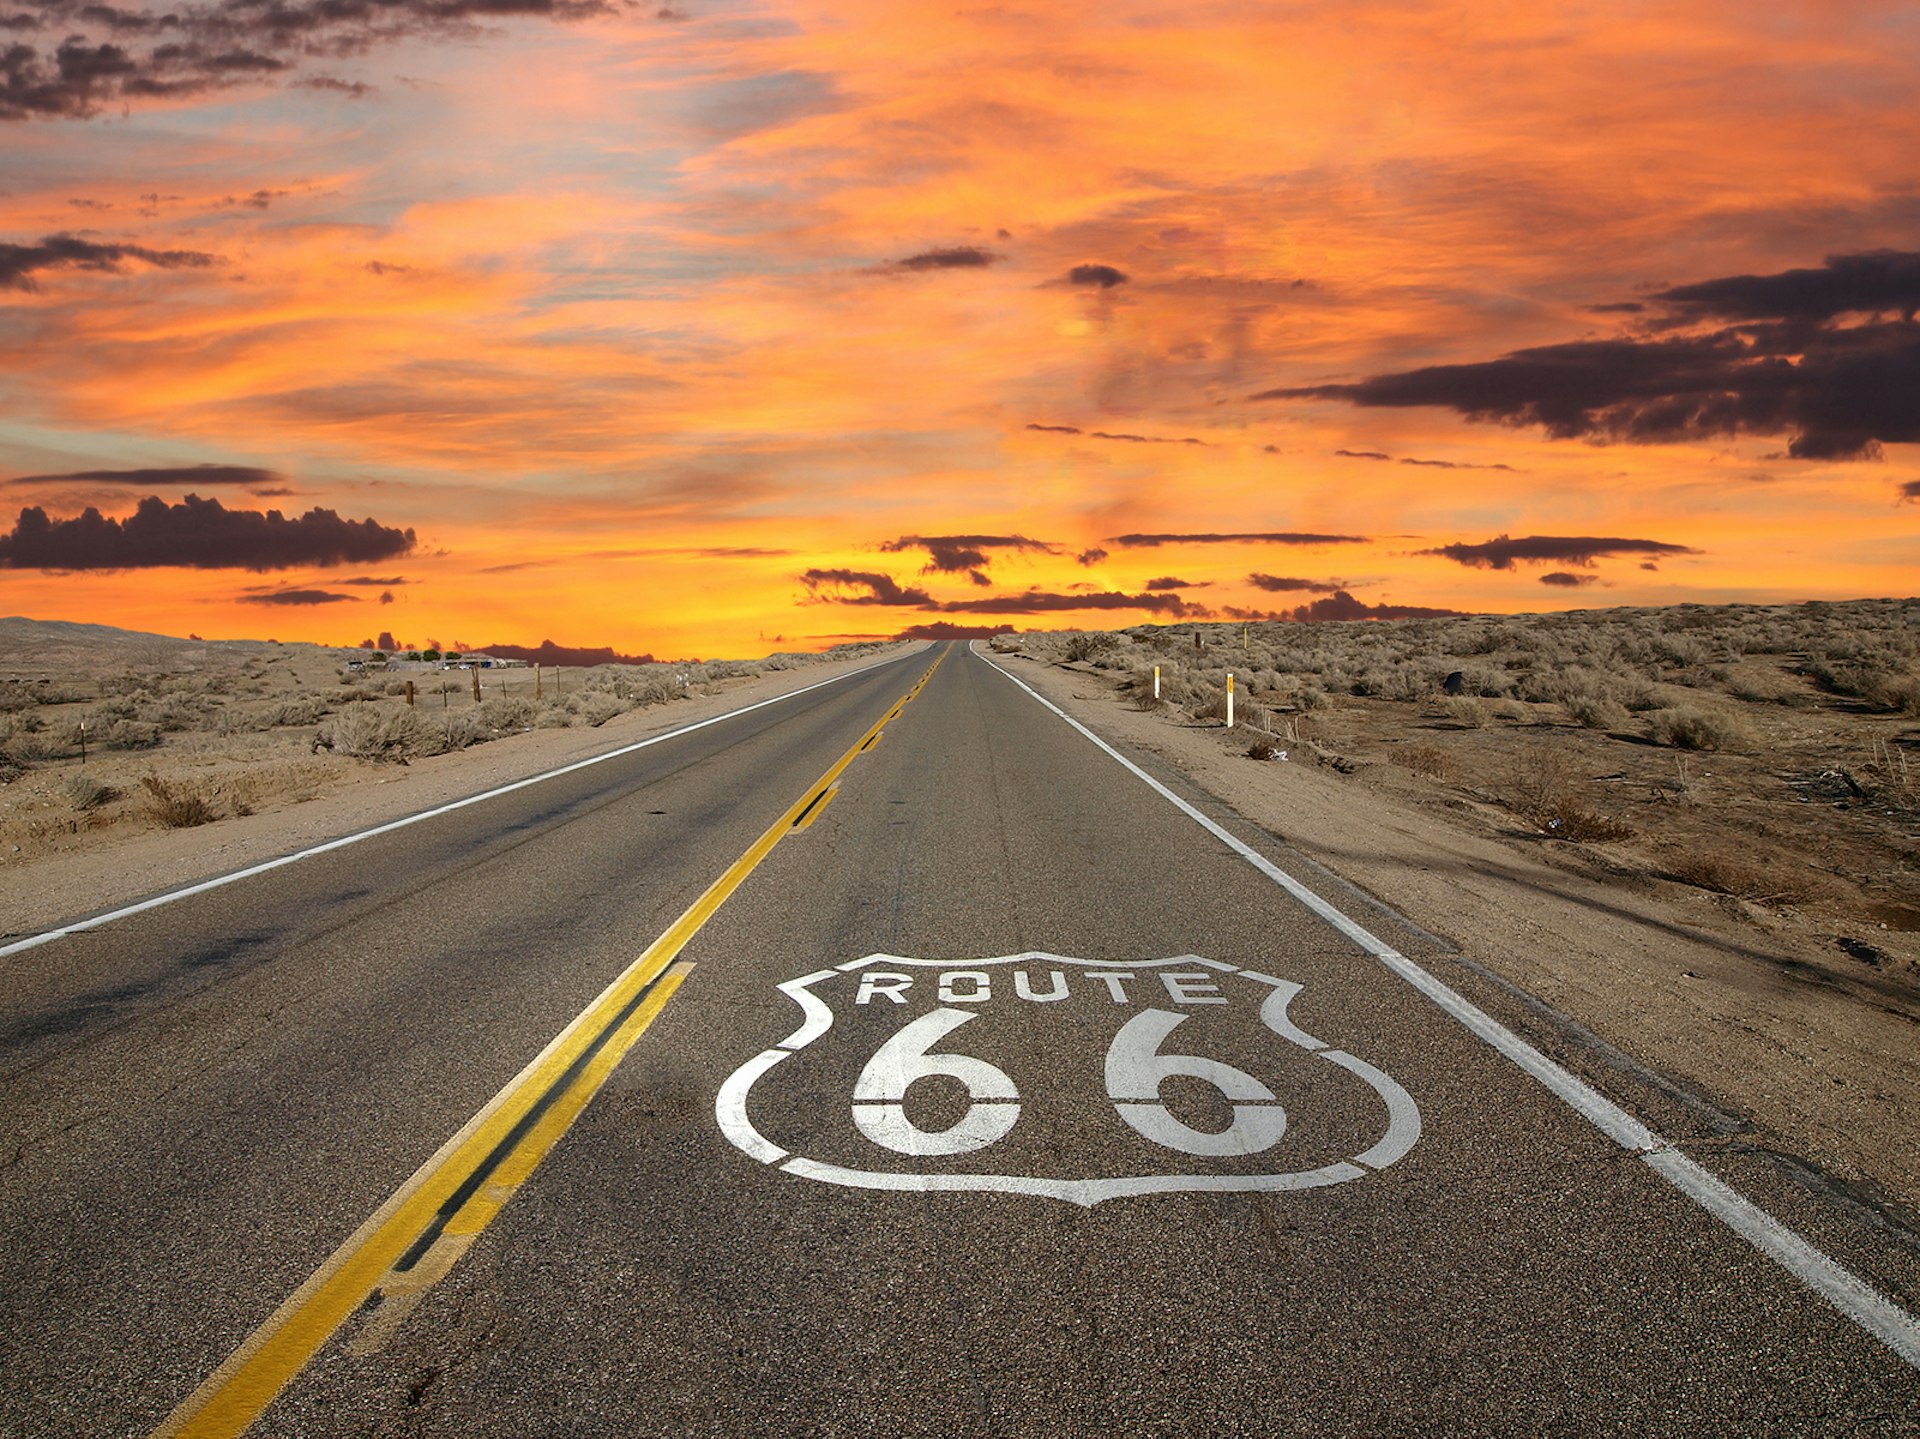 An orange sunset over a road painted with the Route 66 symbol